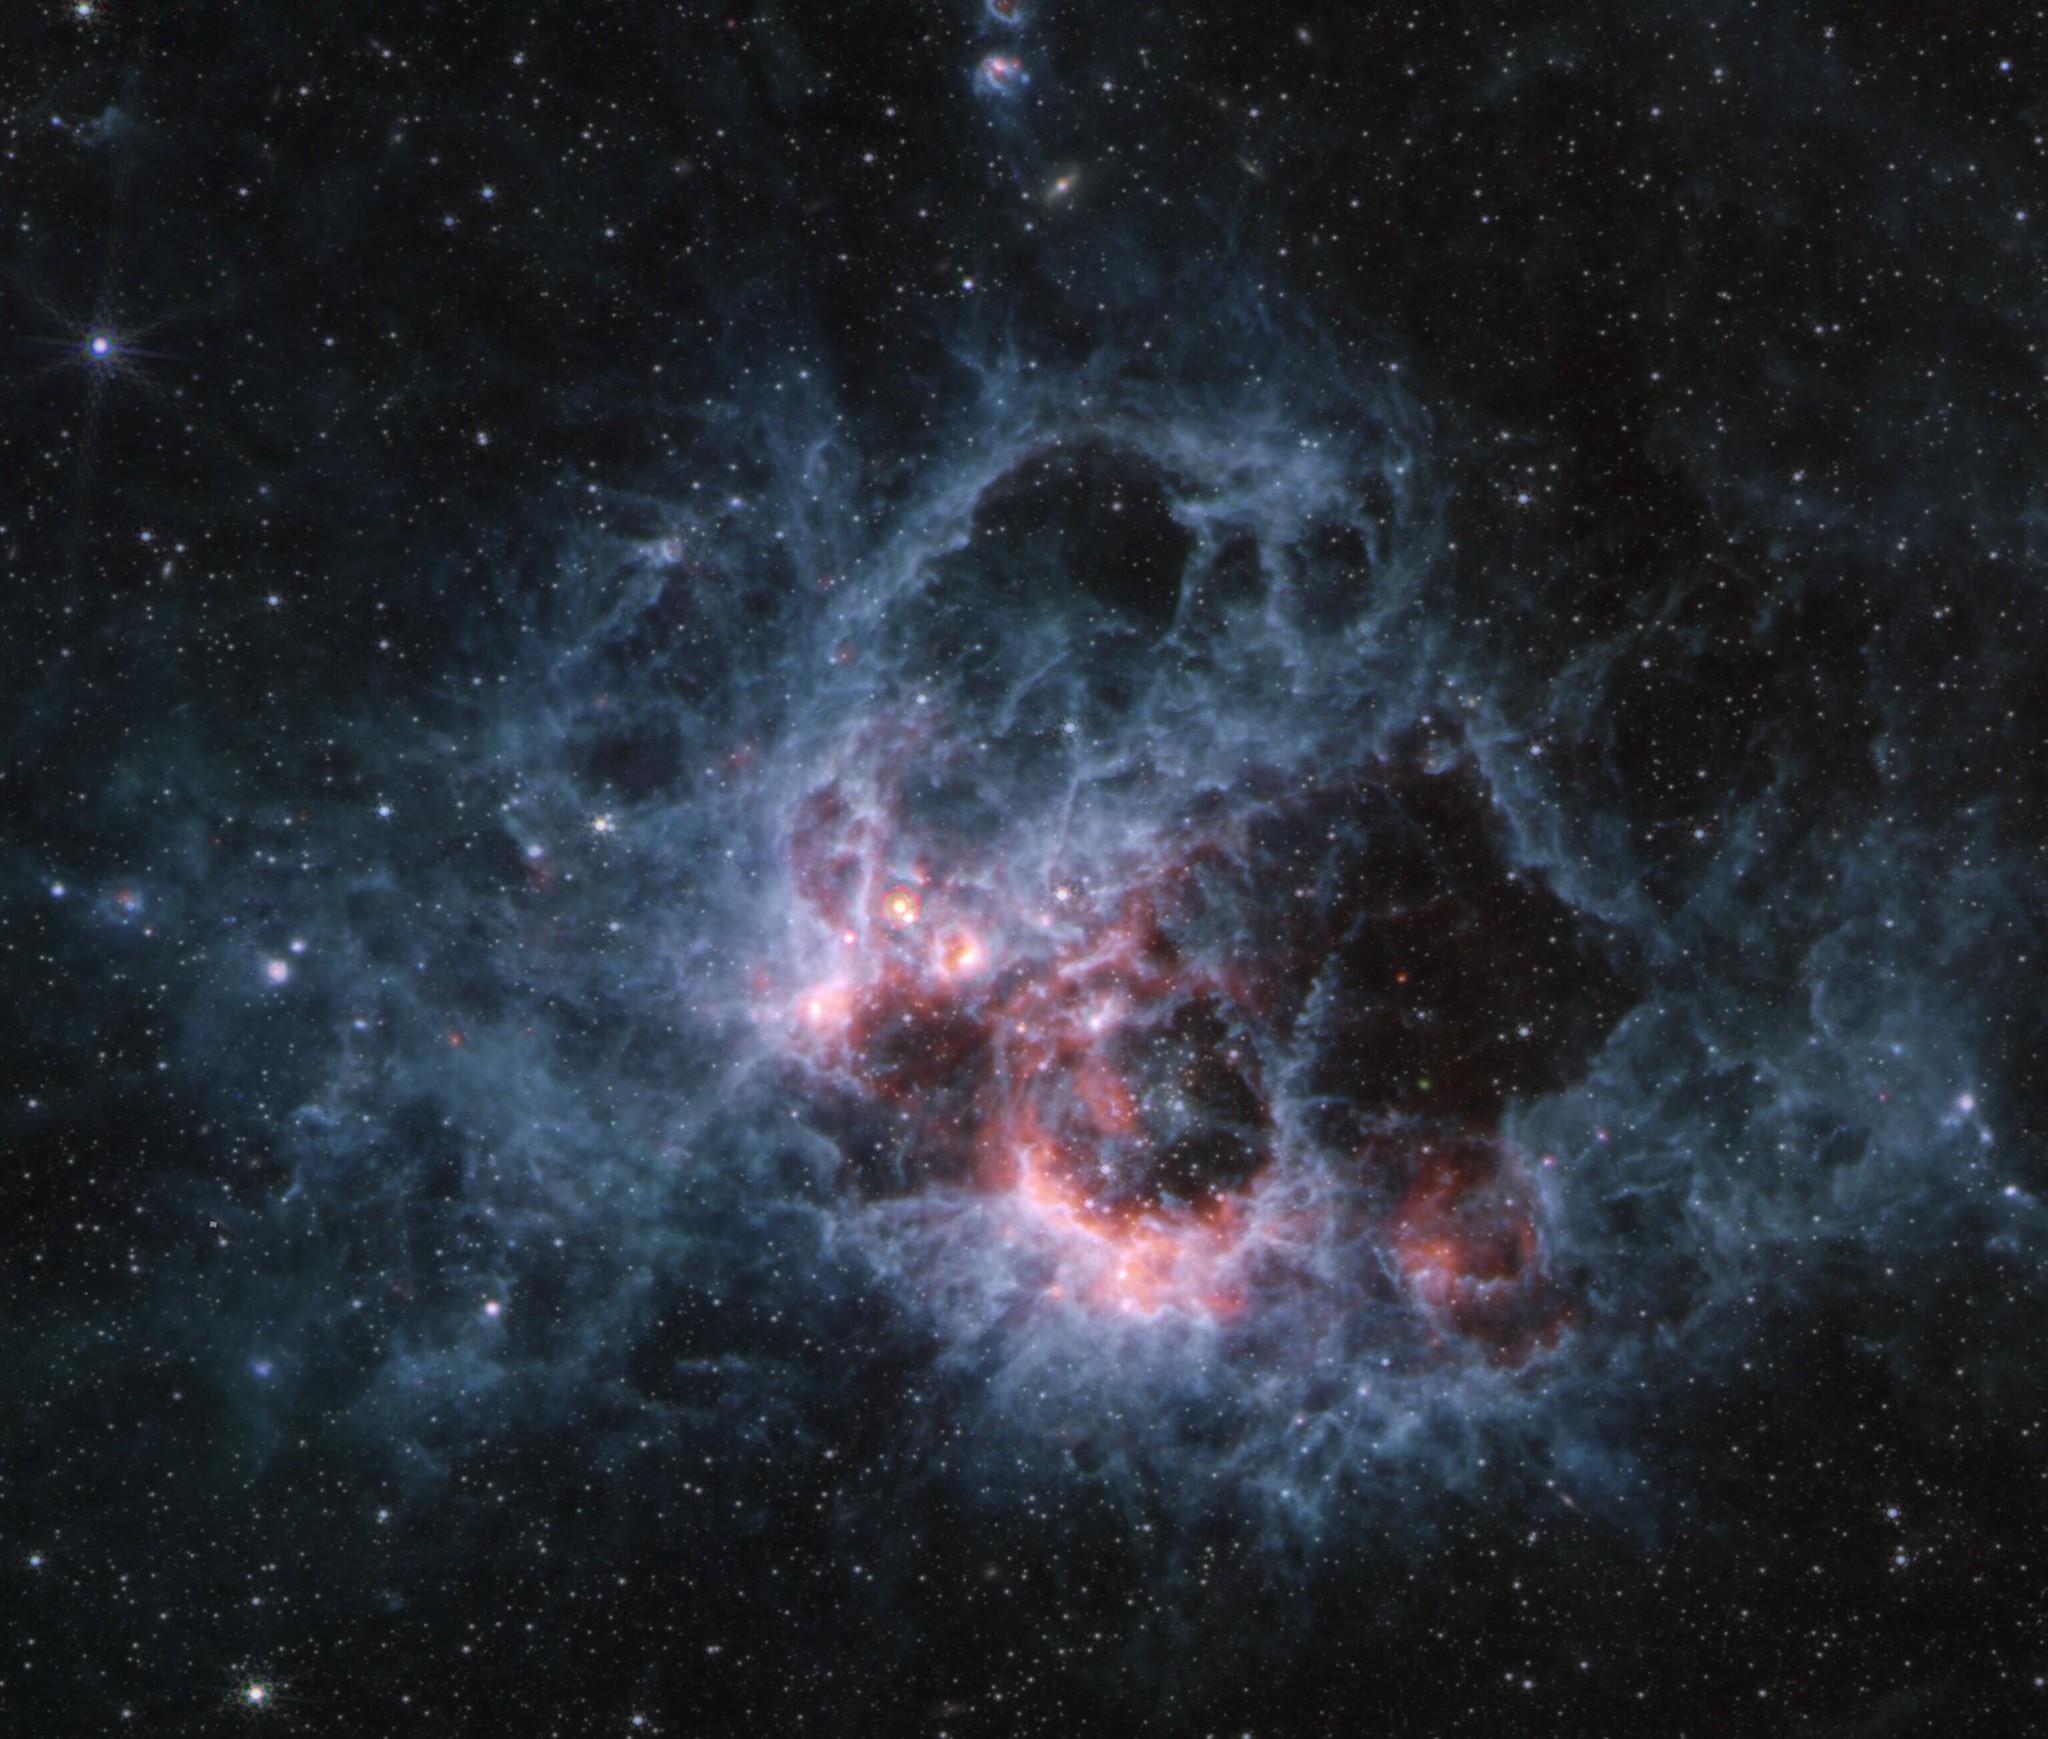 In the center of the image there is a nebula on the black background of space.  The nebula consists of wispy filaments of pale blue clouds.  In the center right of the blue clouds is a large hollow bubble.  The lower left edge of this hollow bubble is filled with shades of pink and white gas.  There are hundreds of faint stars filling the nebula's surroundings.